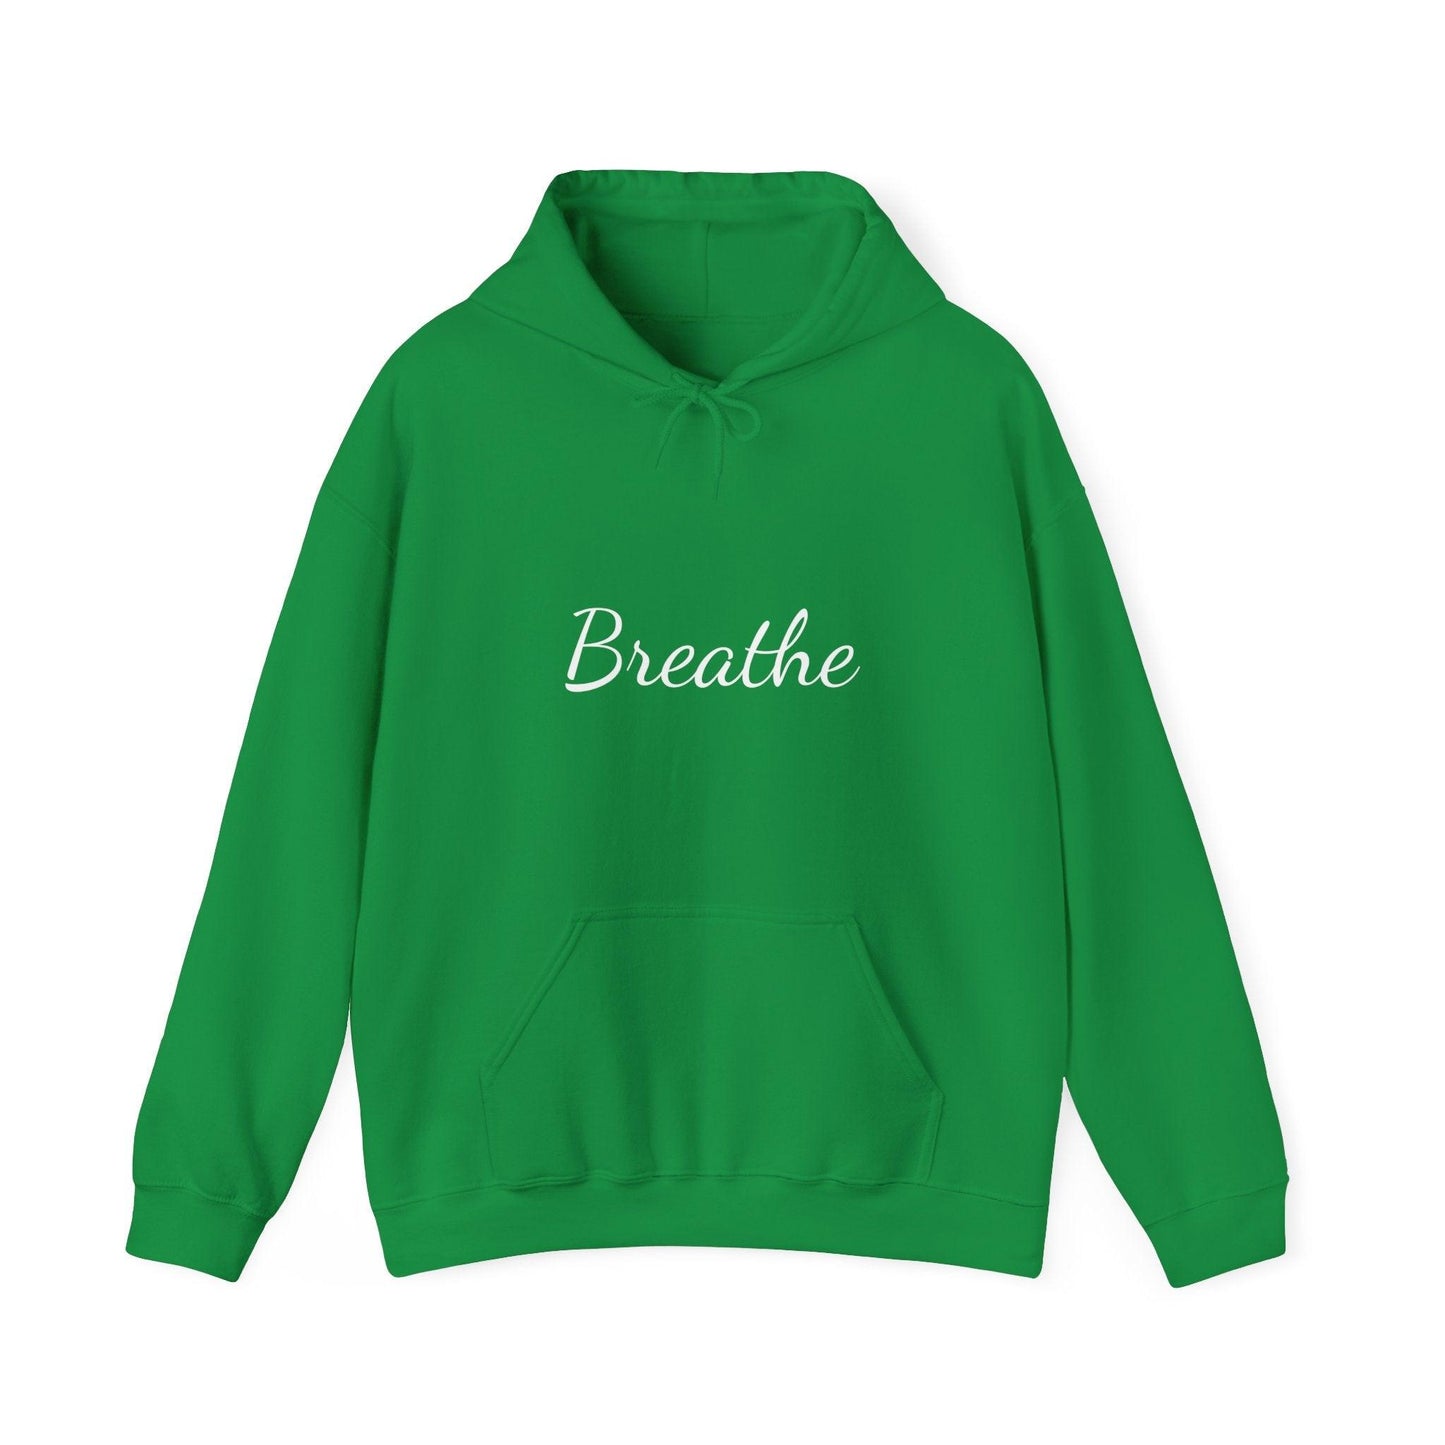 Green Unisex with White Breathe Logo Hoodie - Perfect for Travel, Meditation, Mindfulness and daily wear.